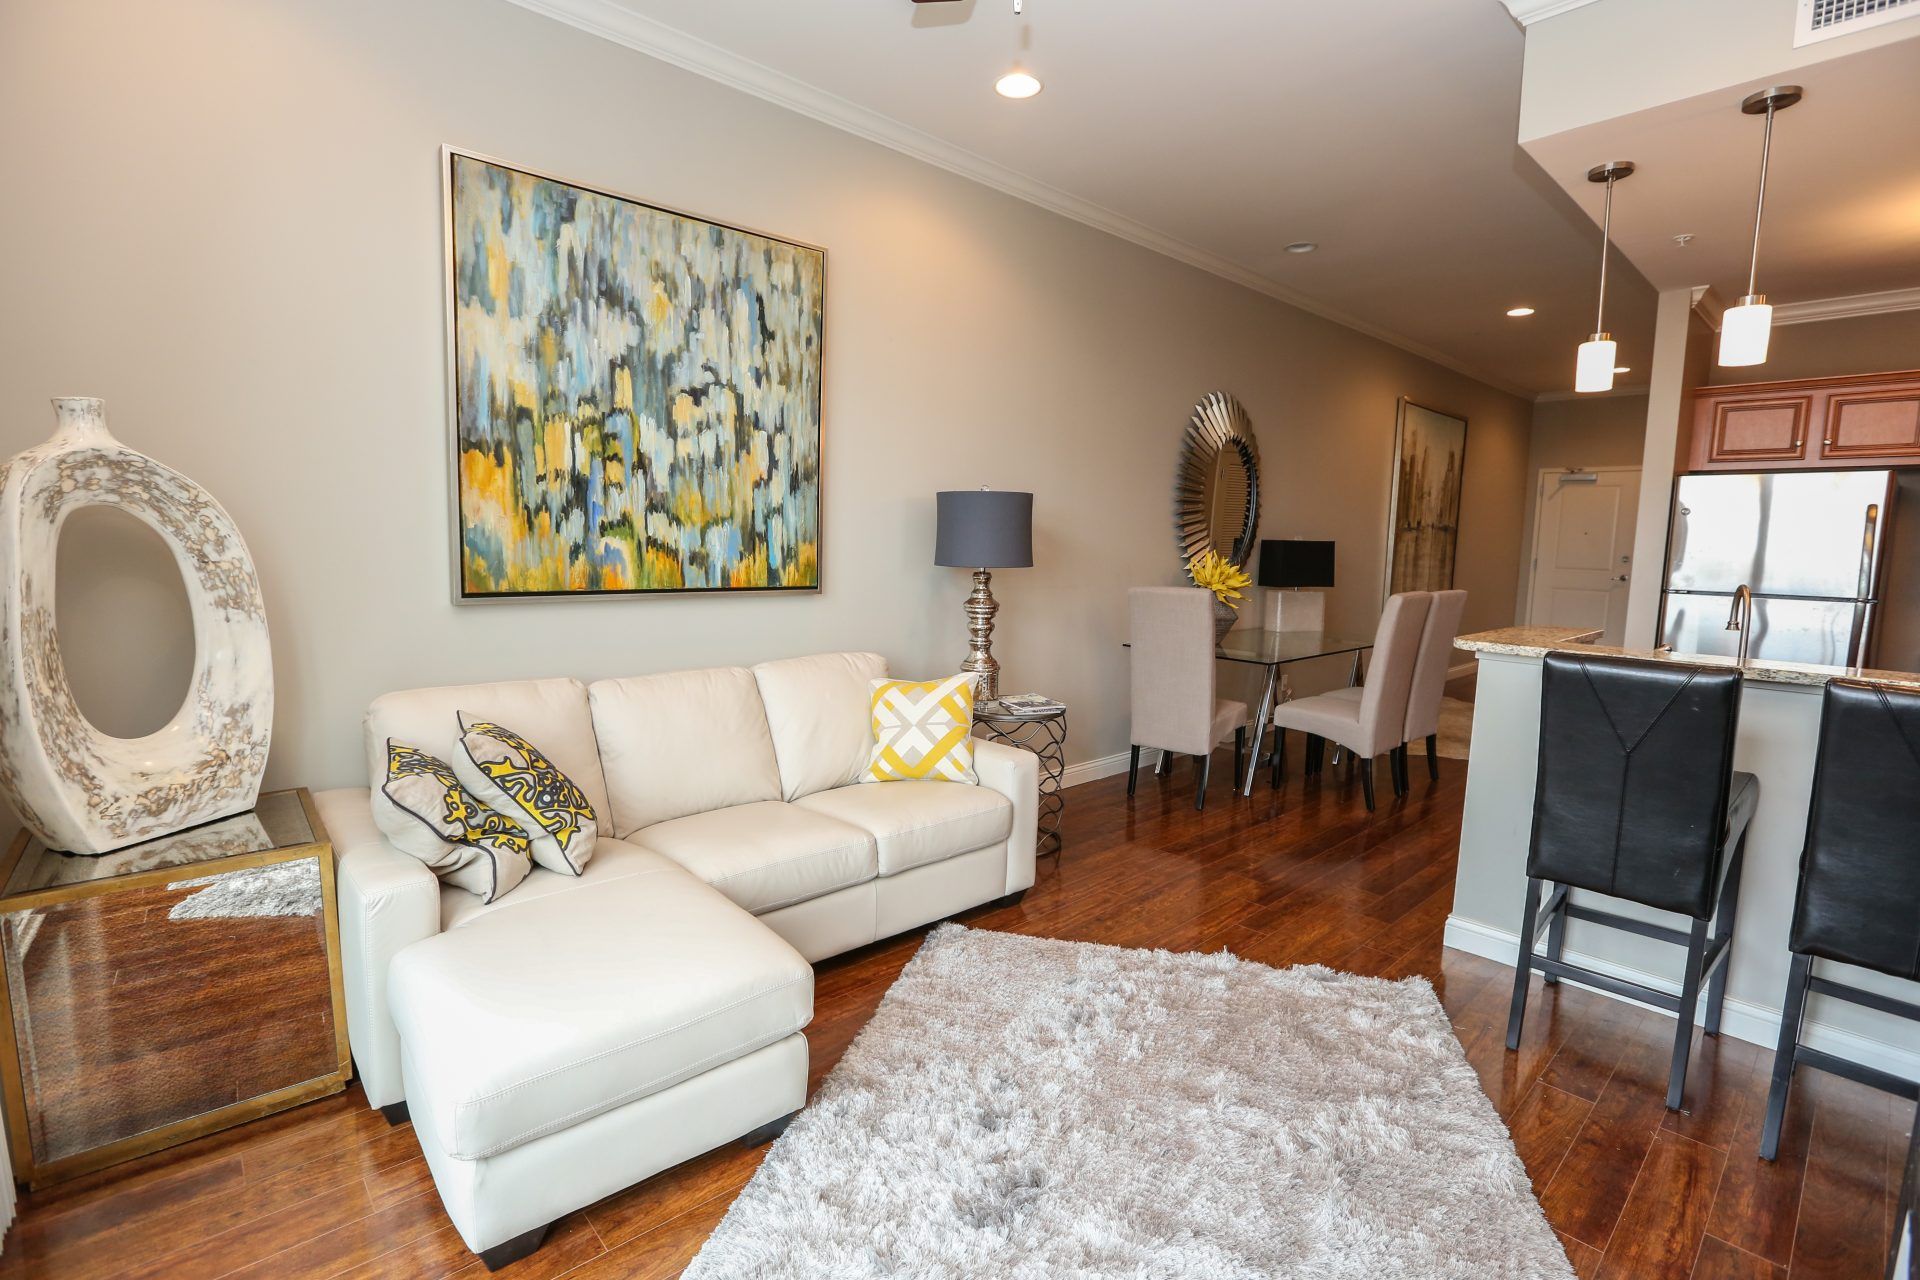 The Lofts of Columbia Features Beautifully Furnished Living Rooms in Columbia, MO